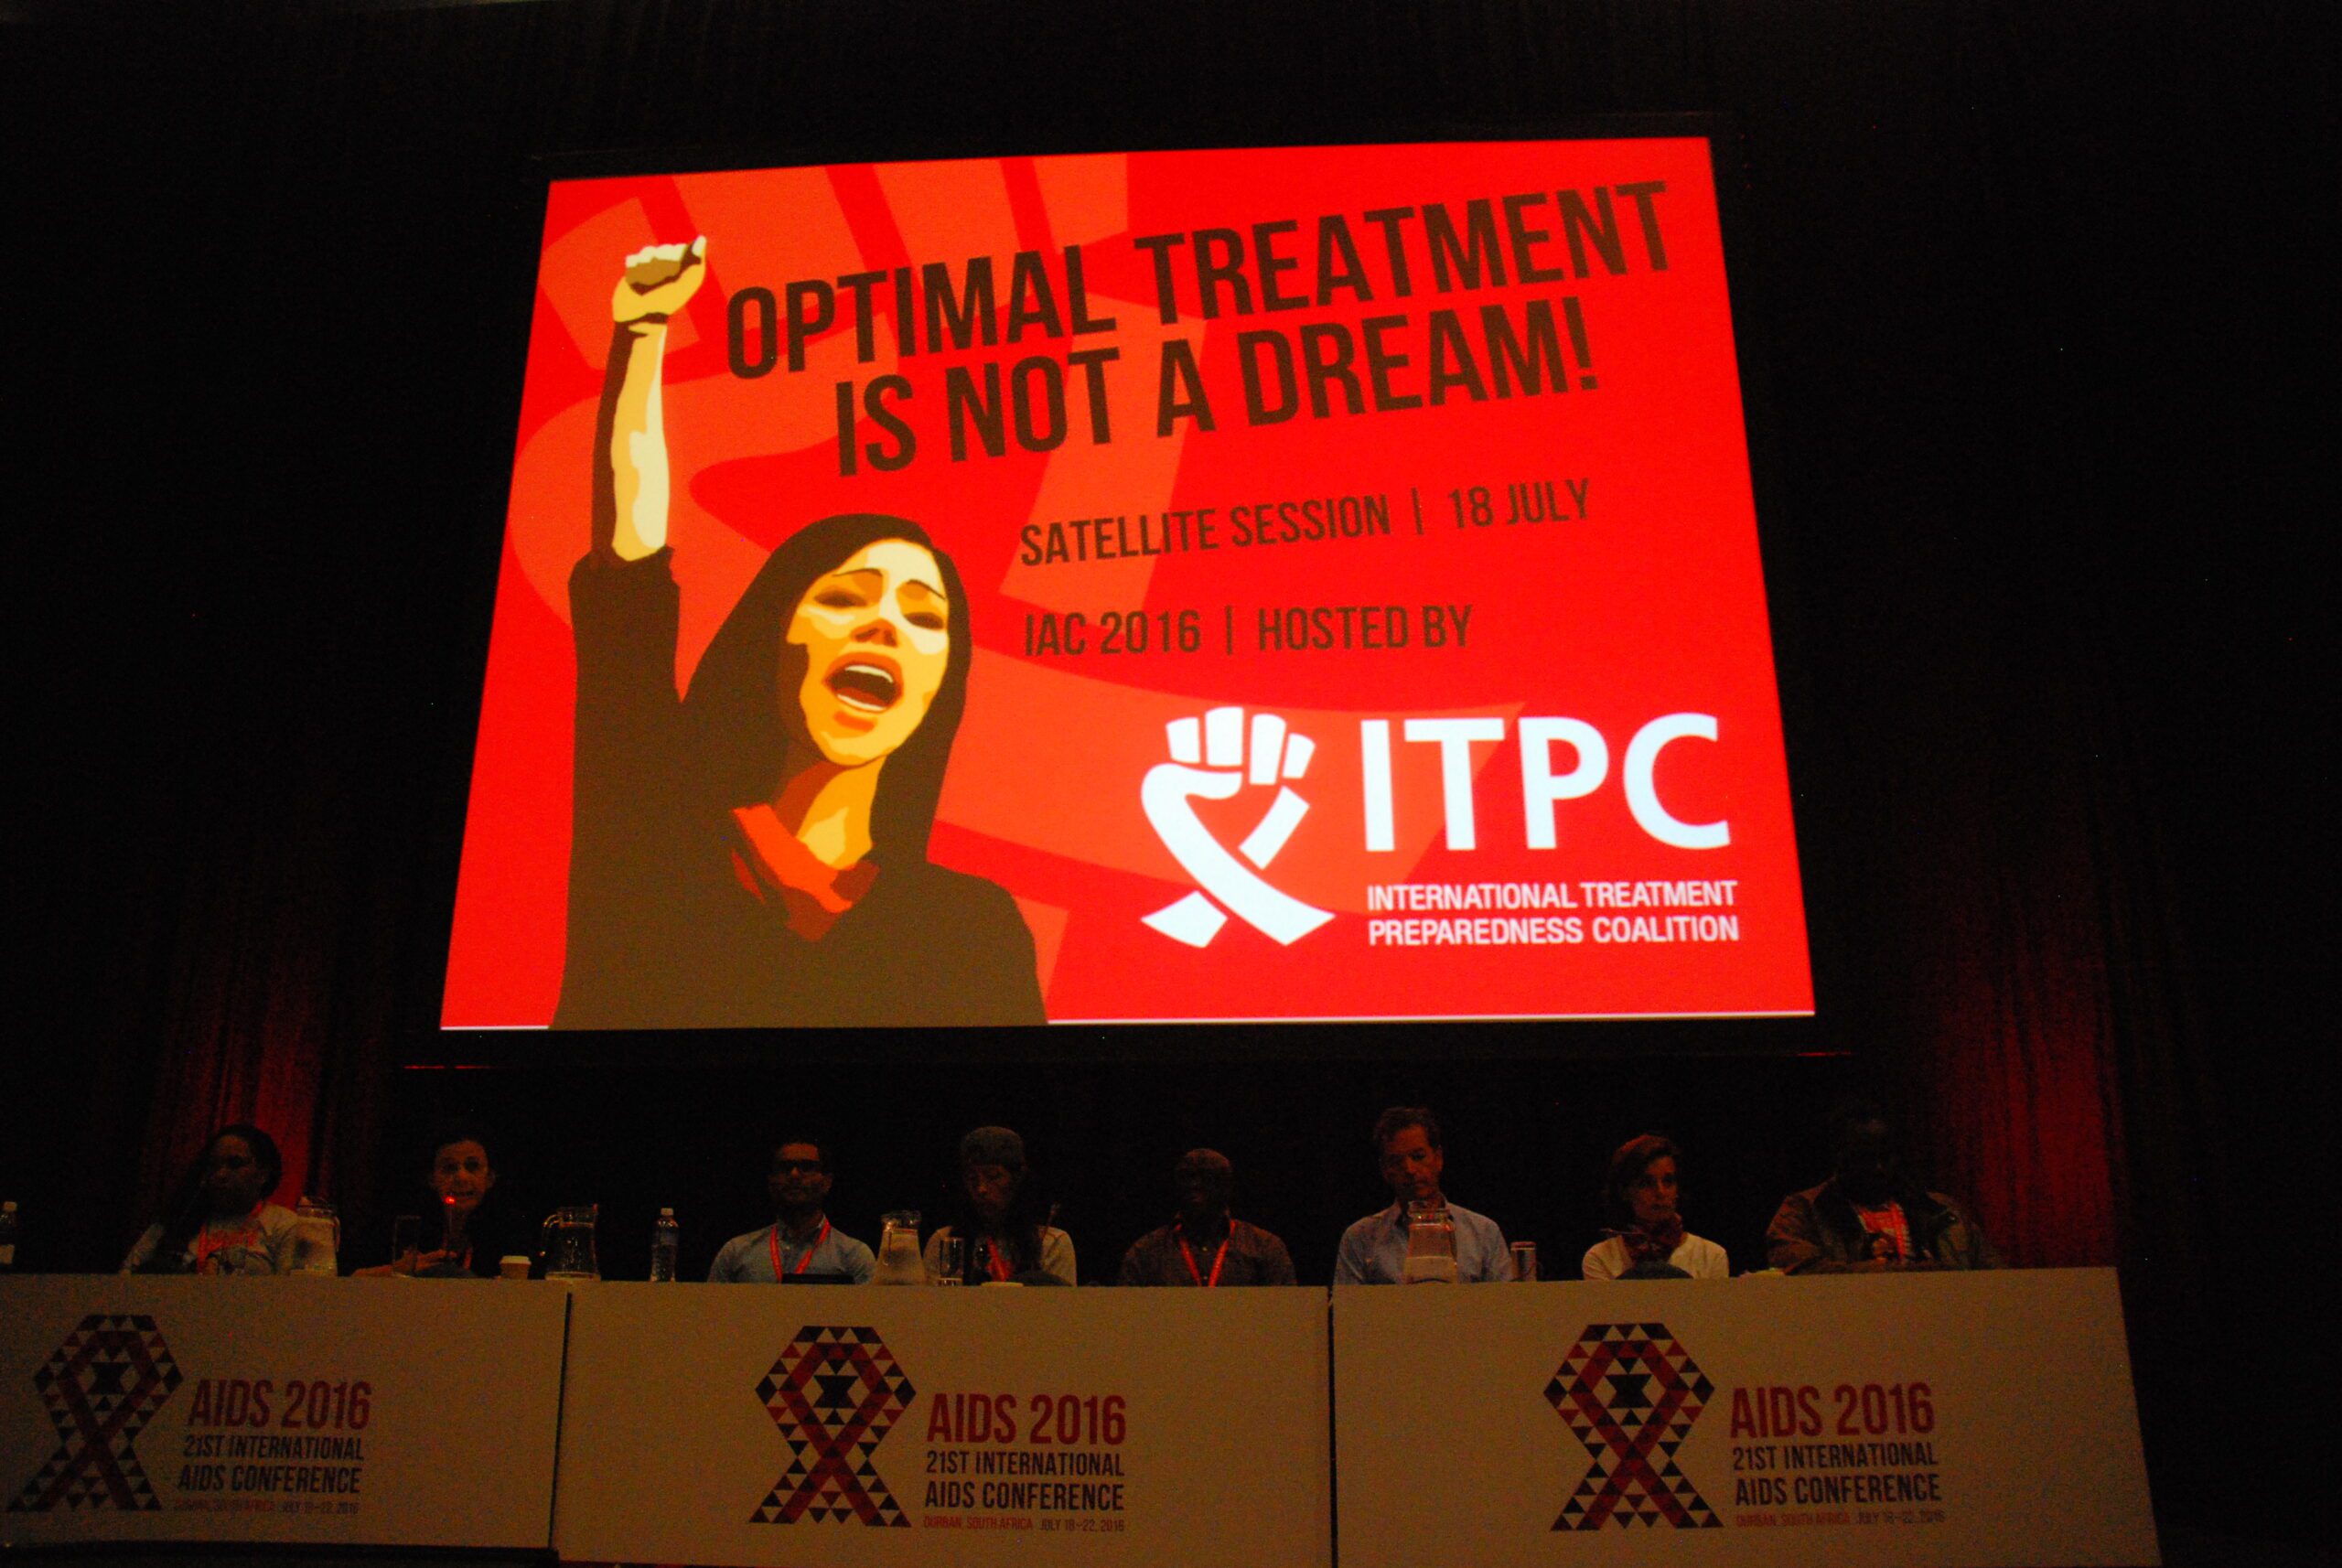 Optimal Treatment is Not a Dream!